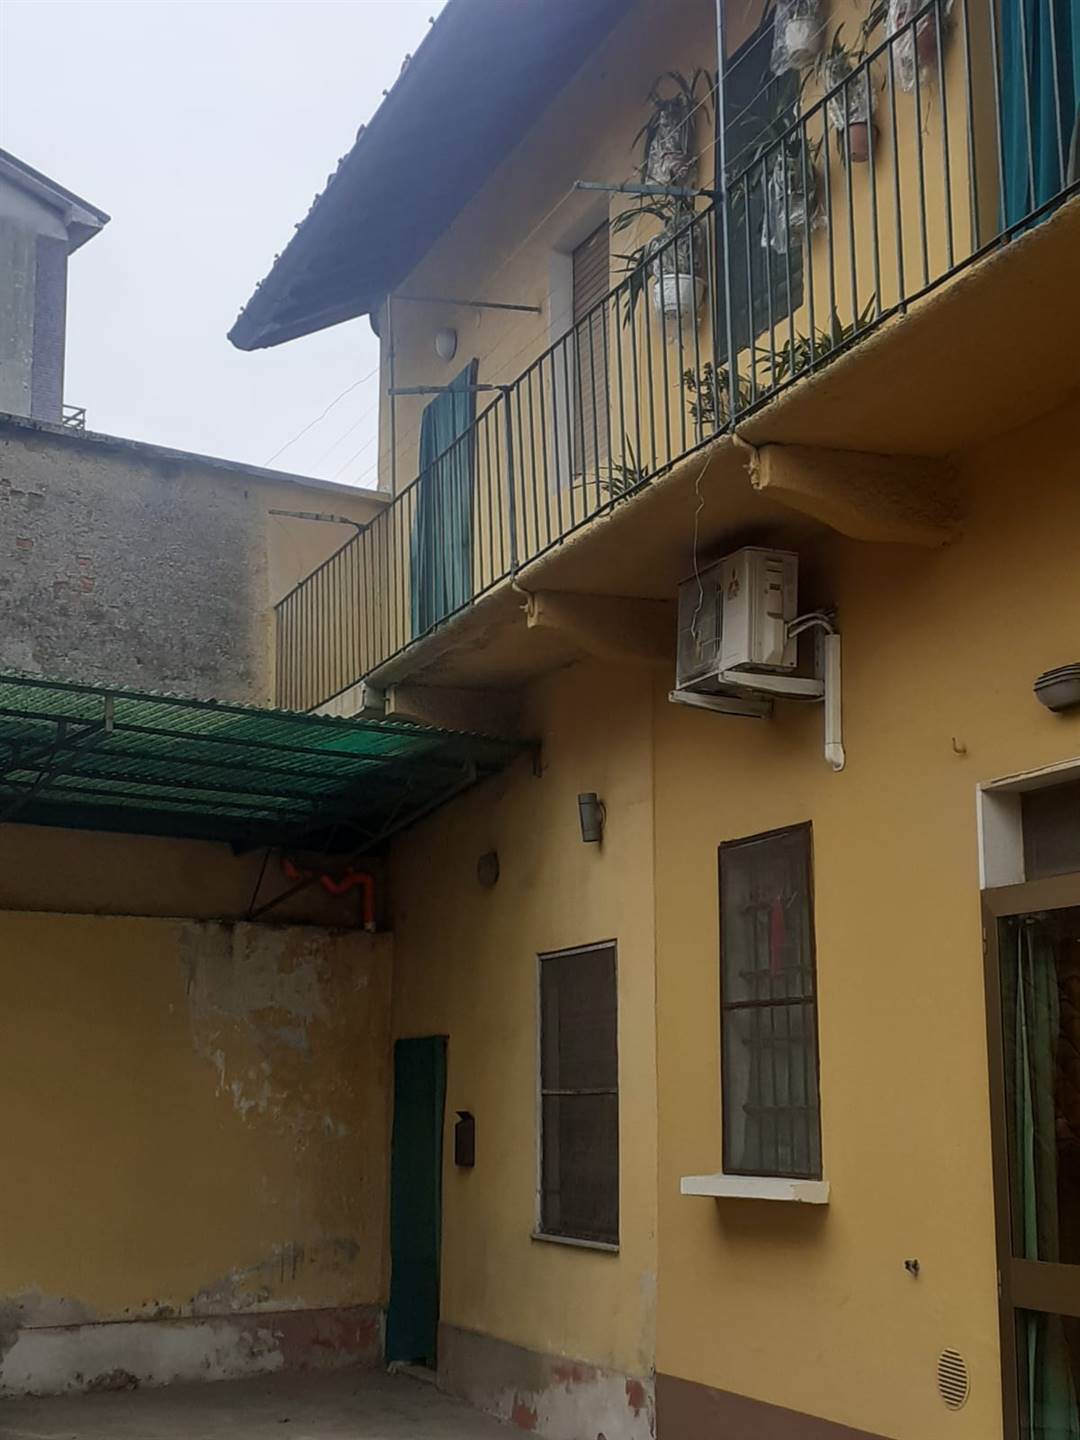 GESSATE, Apartment for rent of 120 Sq. mt., Be restored, Heating Individual heating system, placed at Ground on 2, composed by: 4 Rooms, Separate 